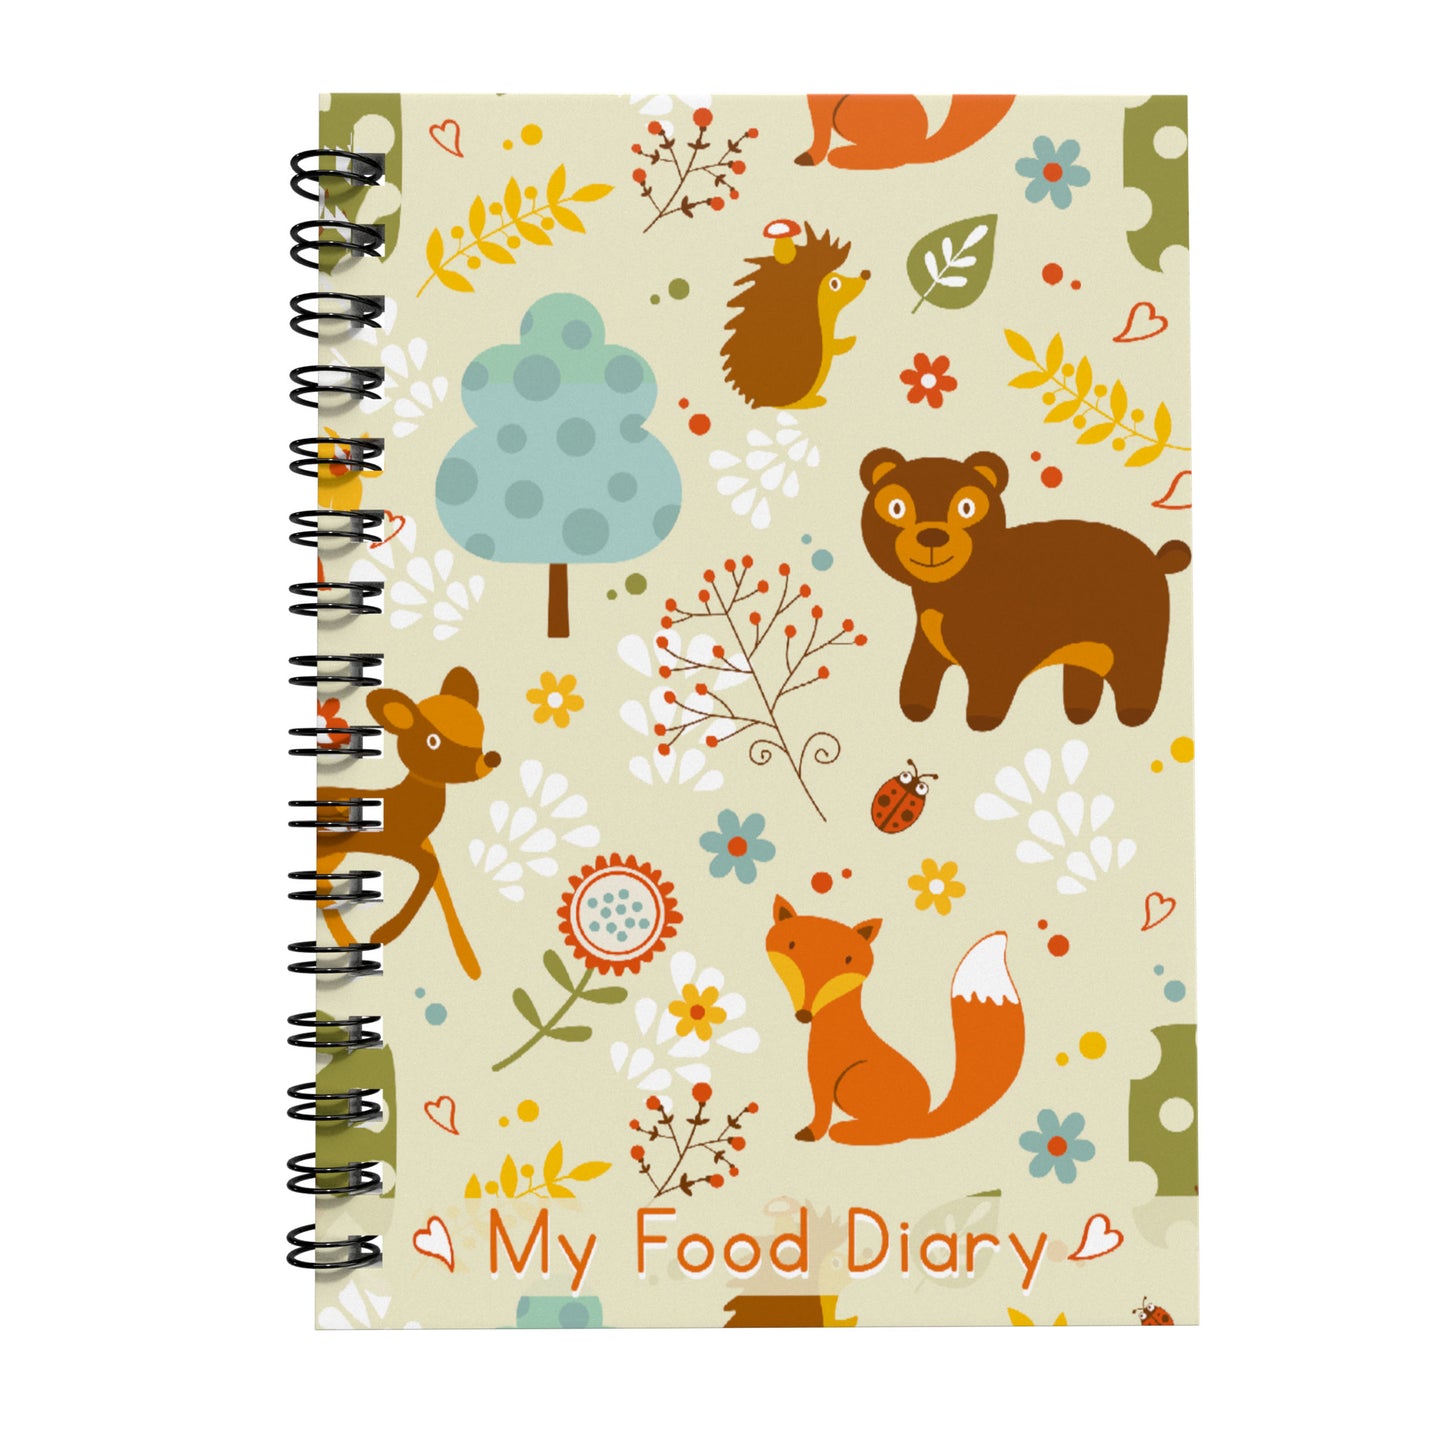 Food Diary - C35 - Slimming World Compatible - Compact